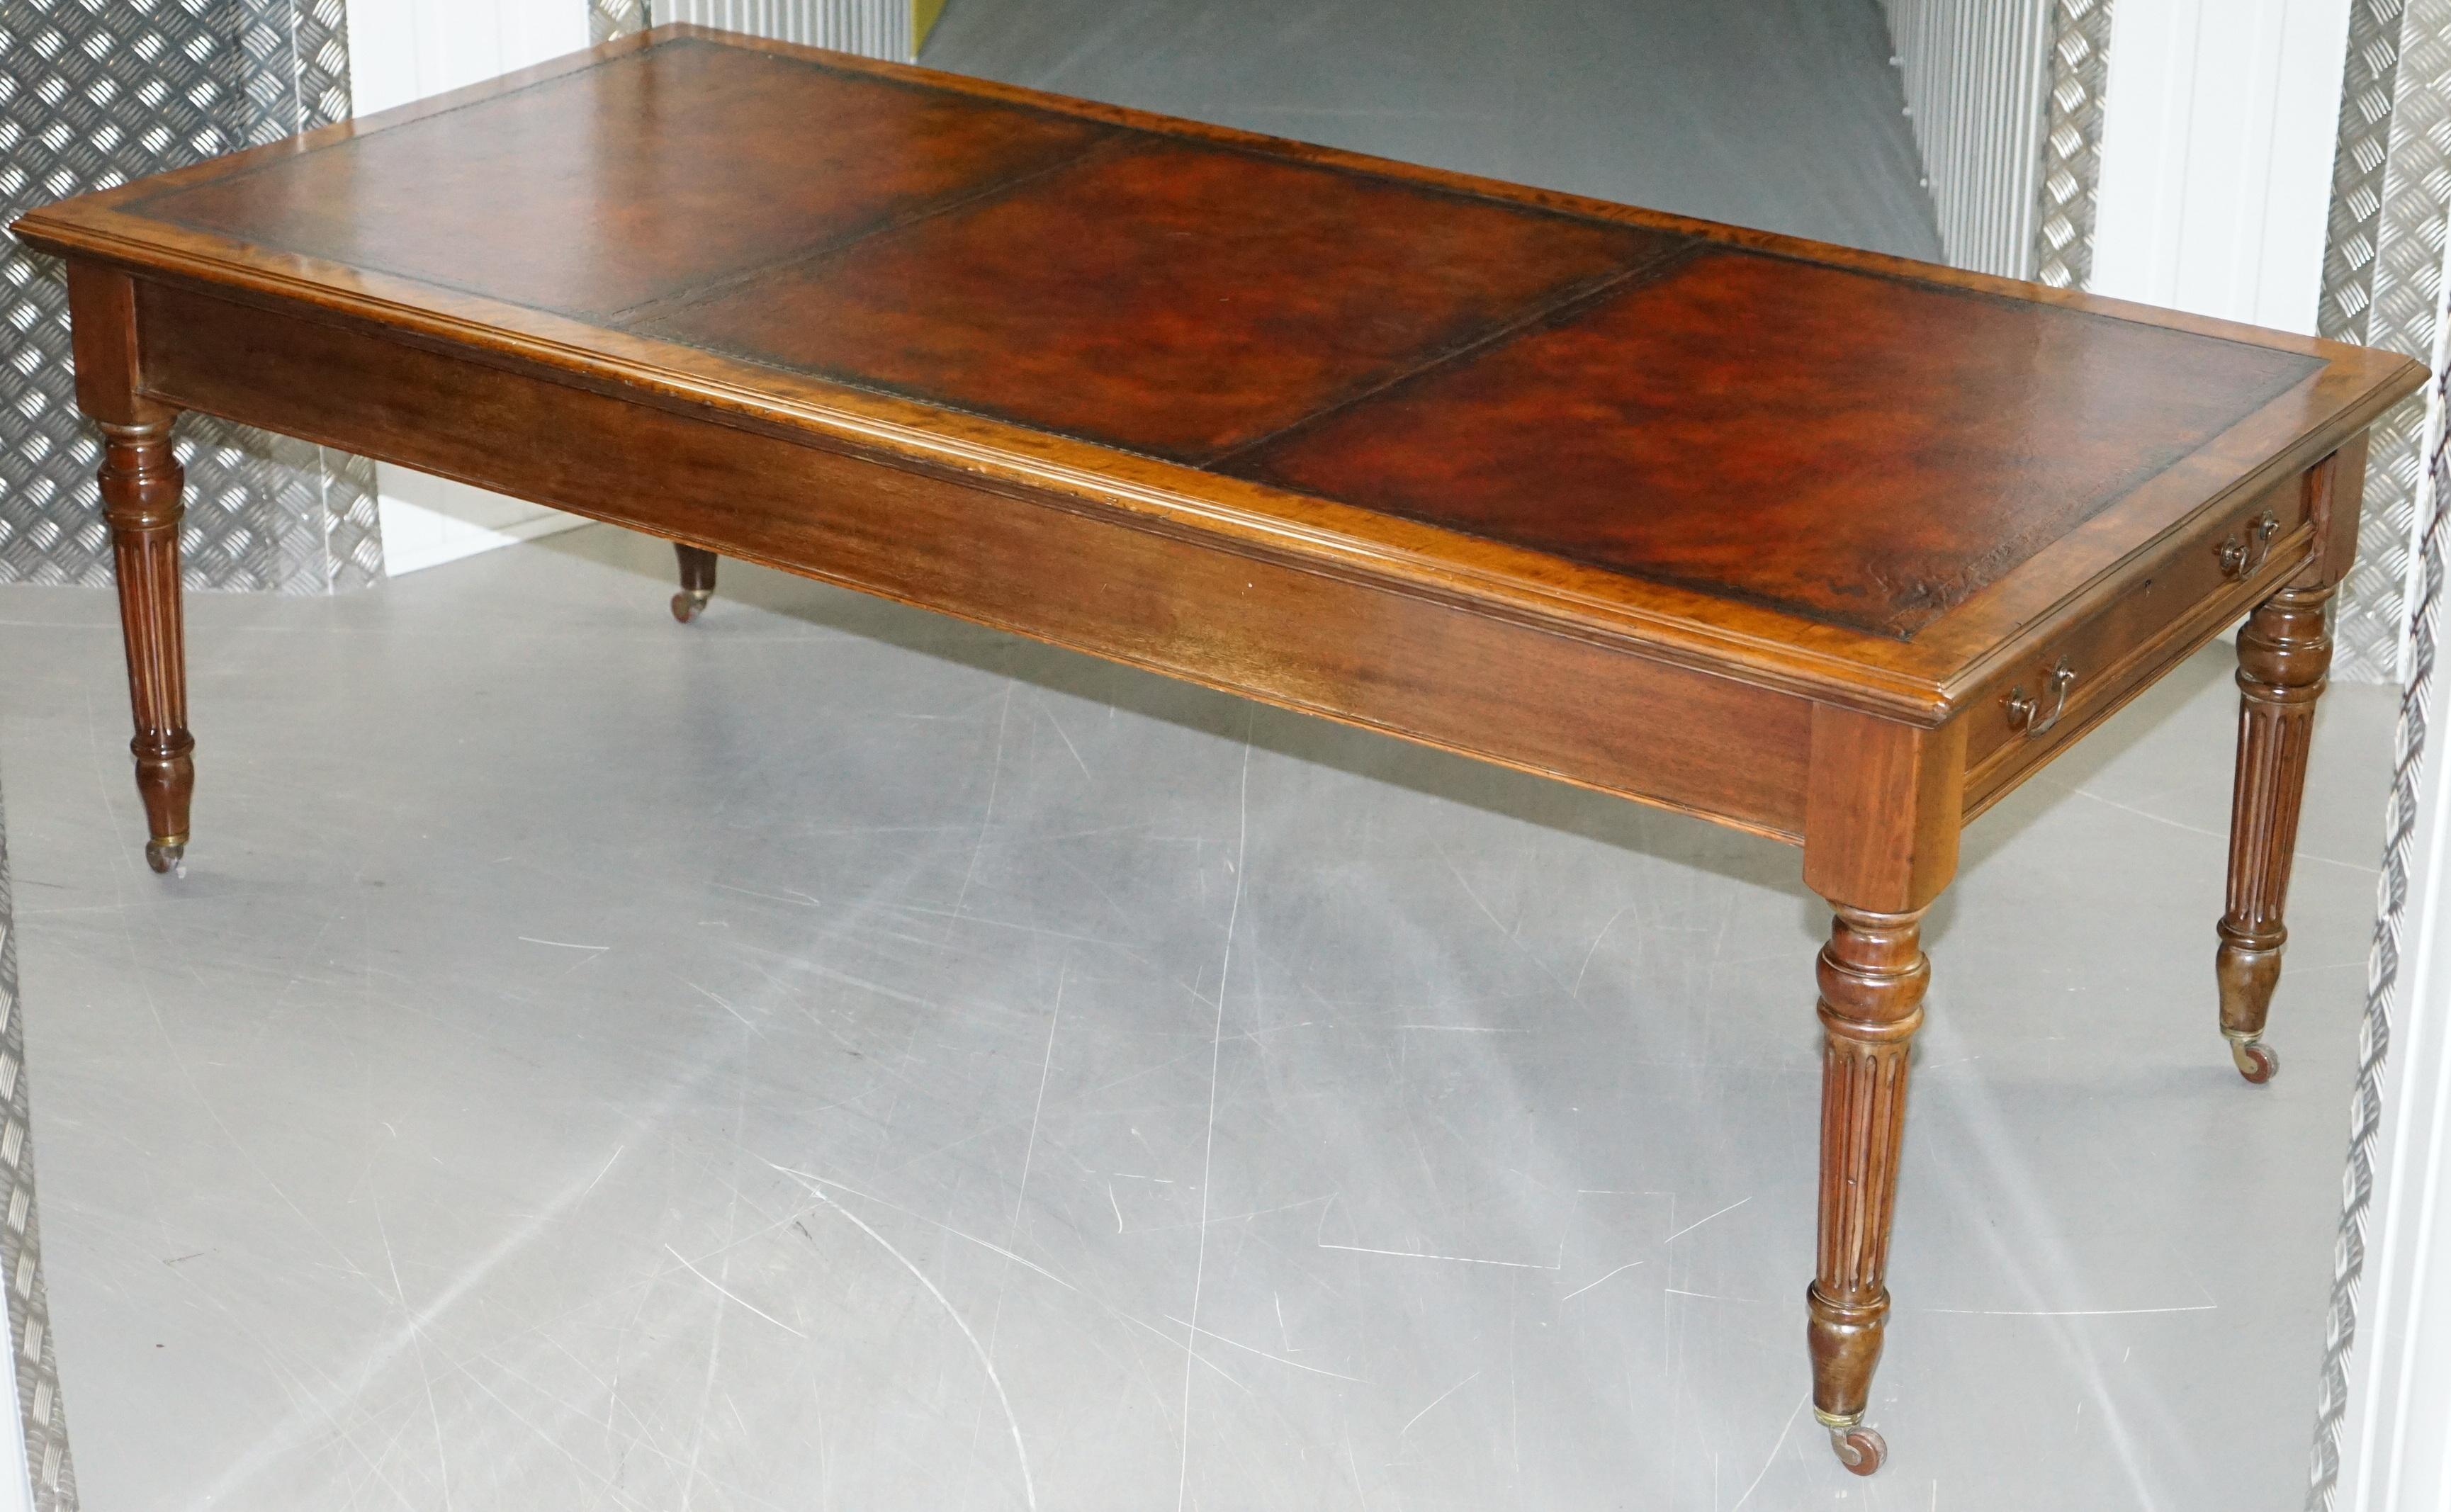 Huge Restored Victorian Refectory Library Dining Table Brown Leather Top Gillows (Viktorianisch)